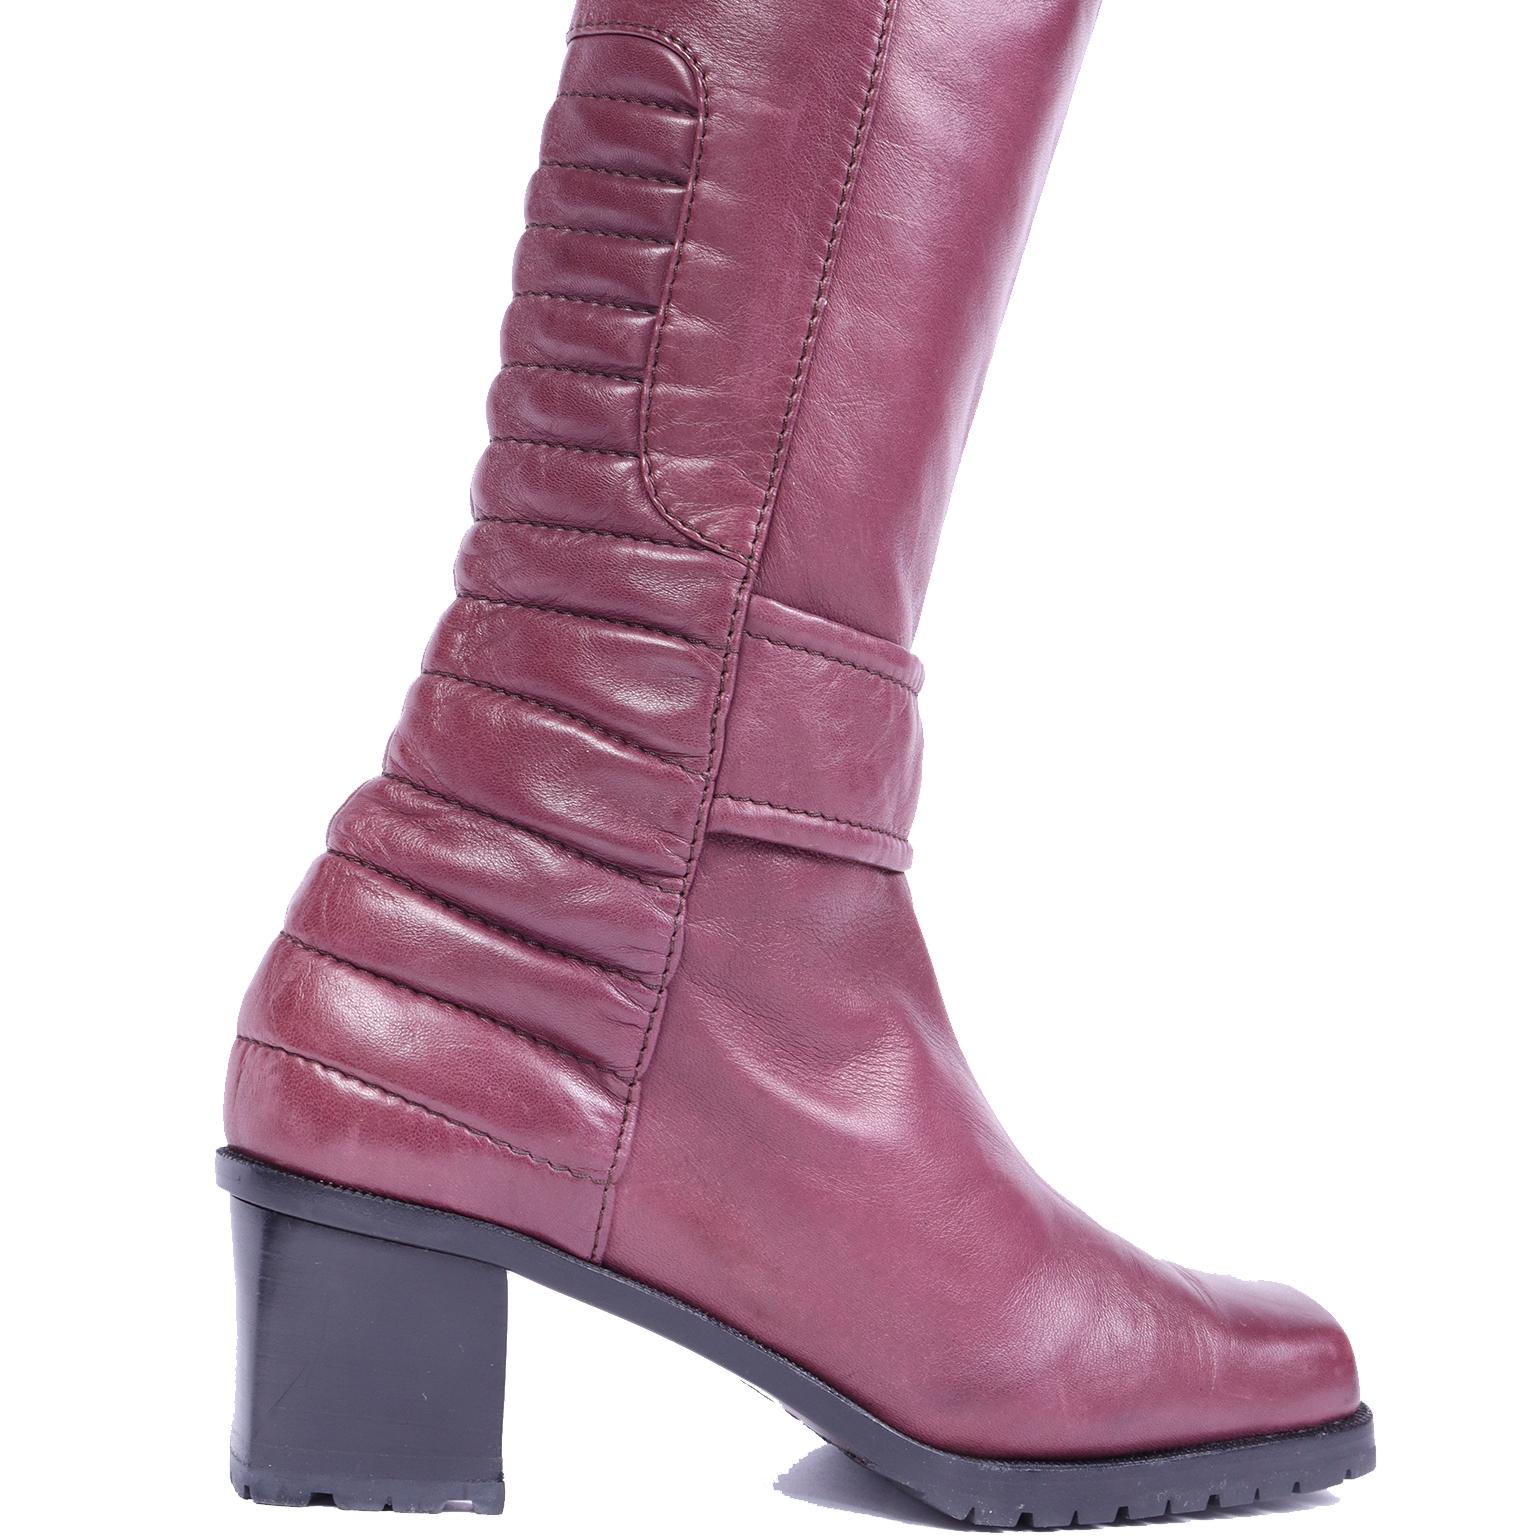 Vintage Claude Montana Thigh High Leather Deep Aubergine Fine Leather Boots 1